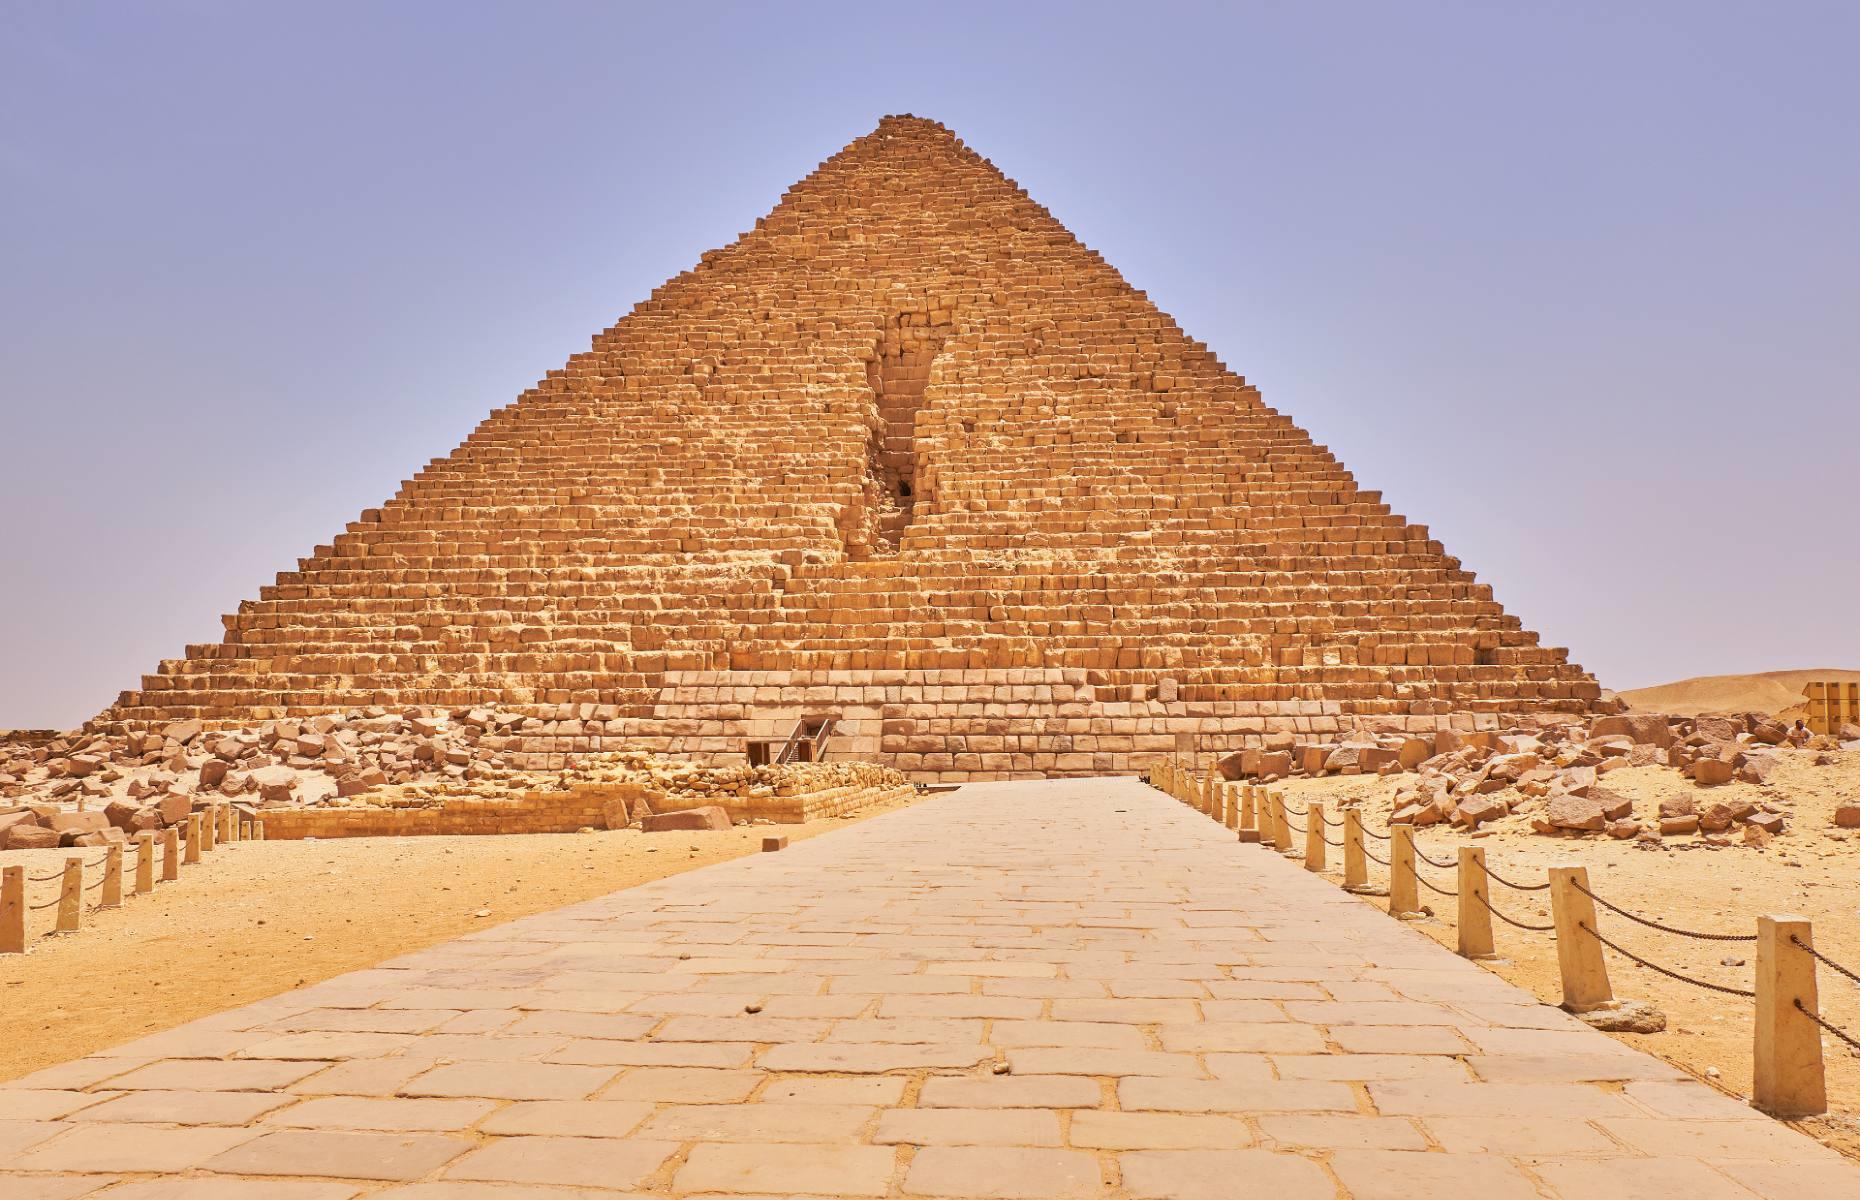 <p>The Menkaure Pyramid is the last and smallest of the three Great Pyramids of Giza, standing at just 213 feet (65m) tall. Completed in the 26th century BC, it was built for King Menkaure, and sits on the same plateau as the pyramids of his father (Khafre) and grandfather (Khufu).</p>